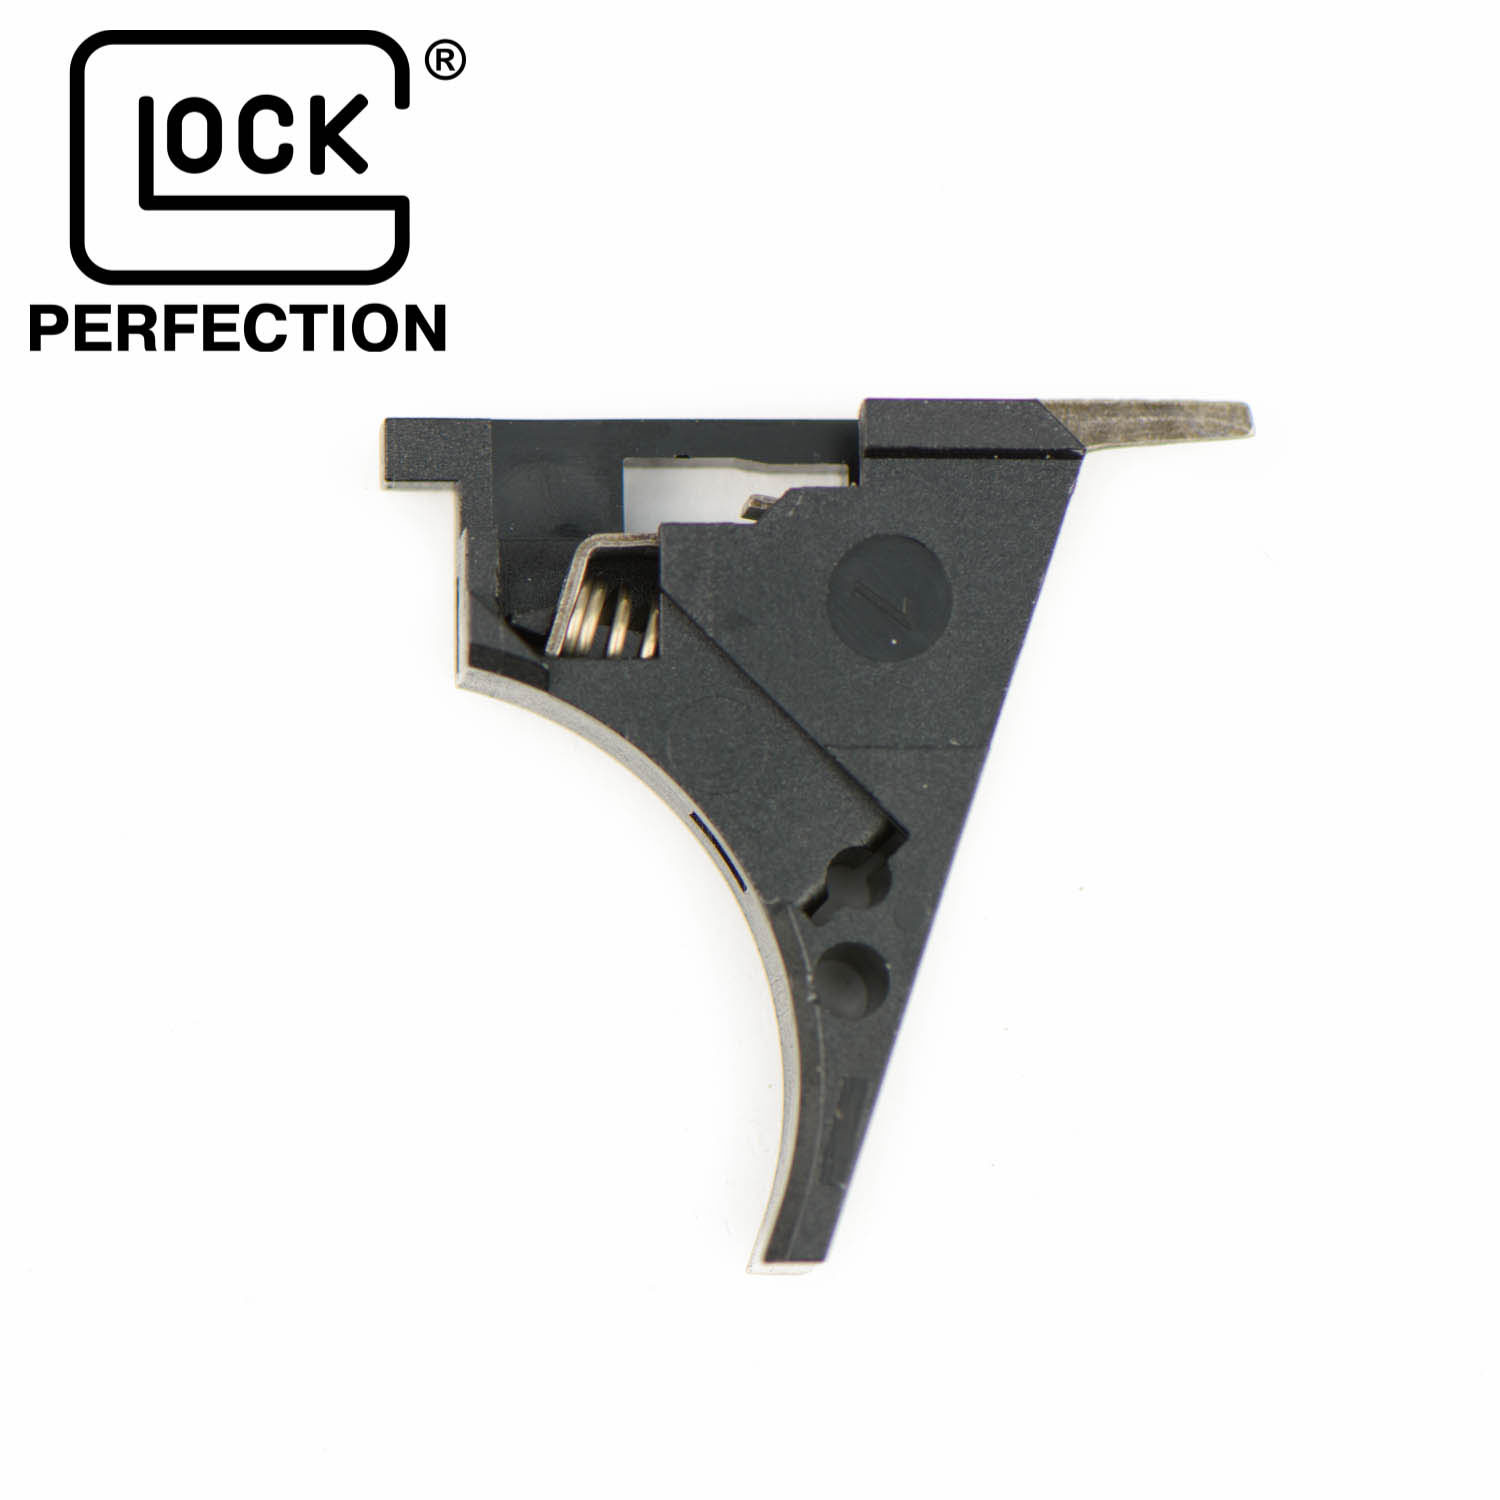 glock ejector replacement